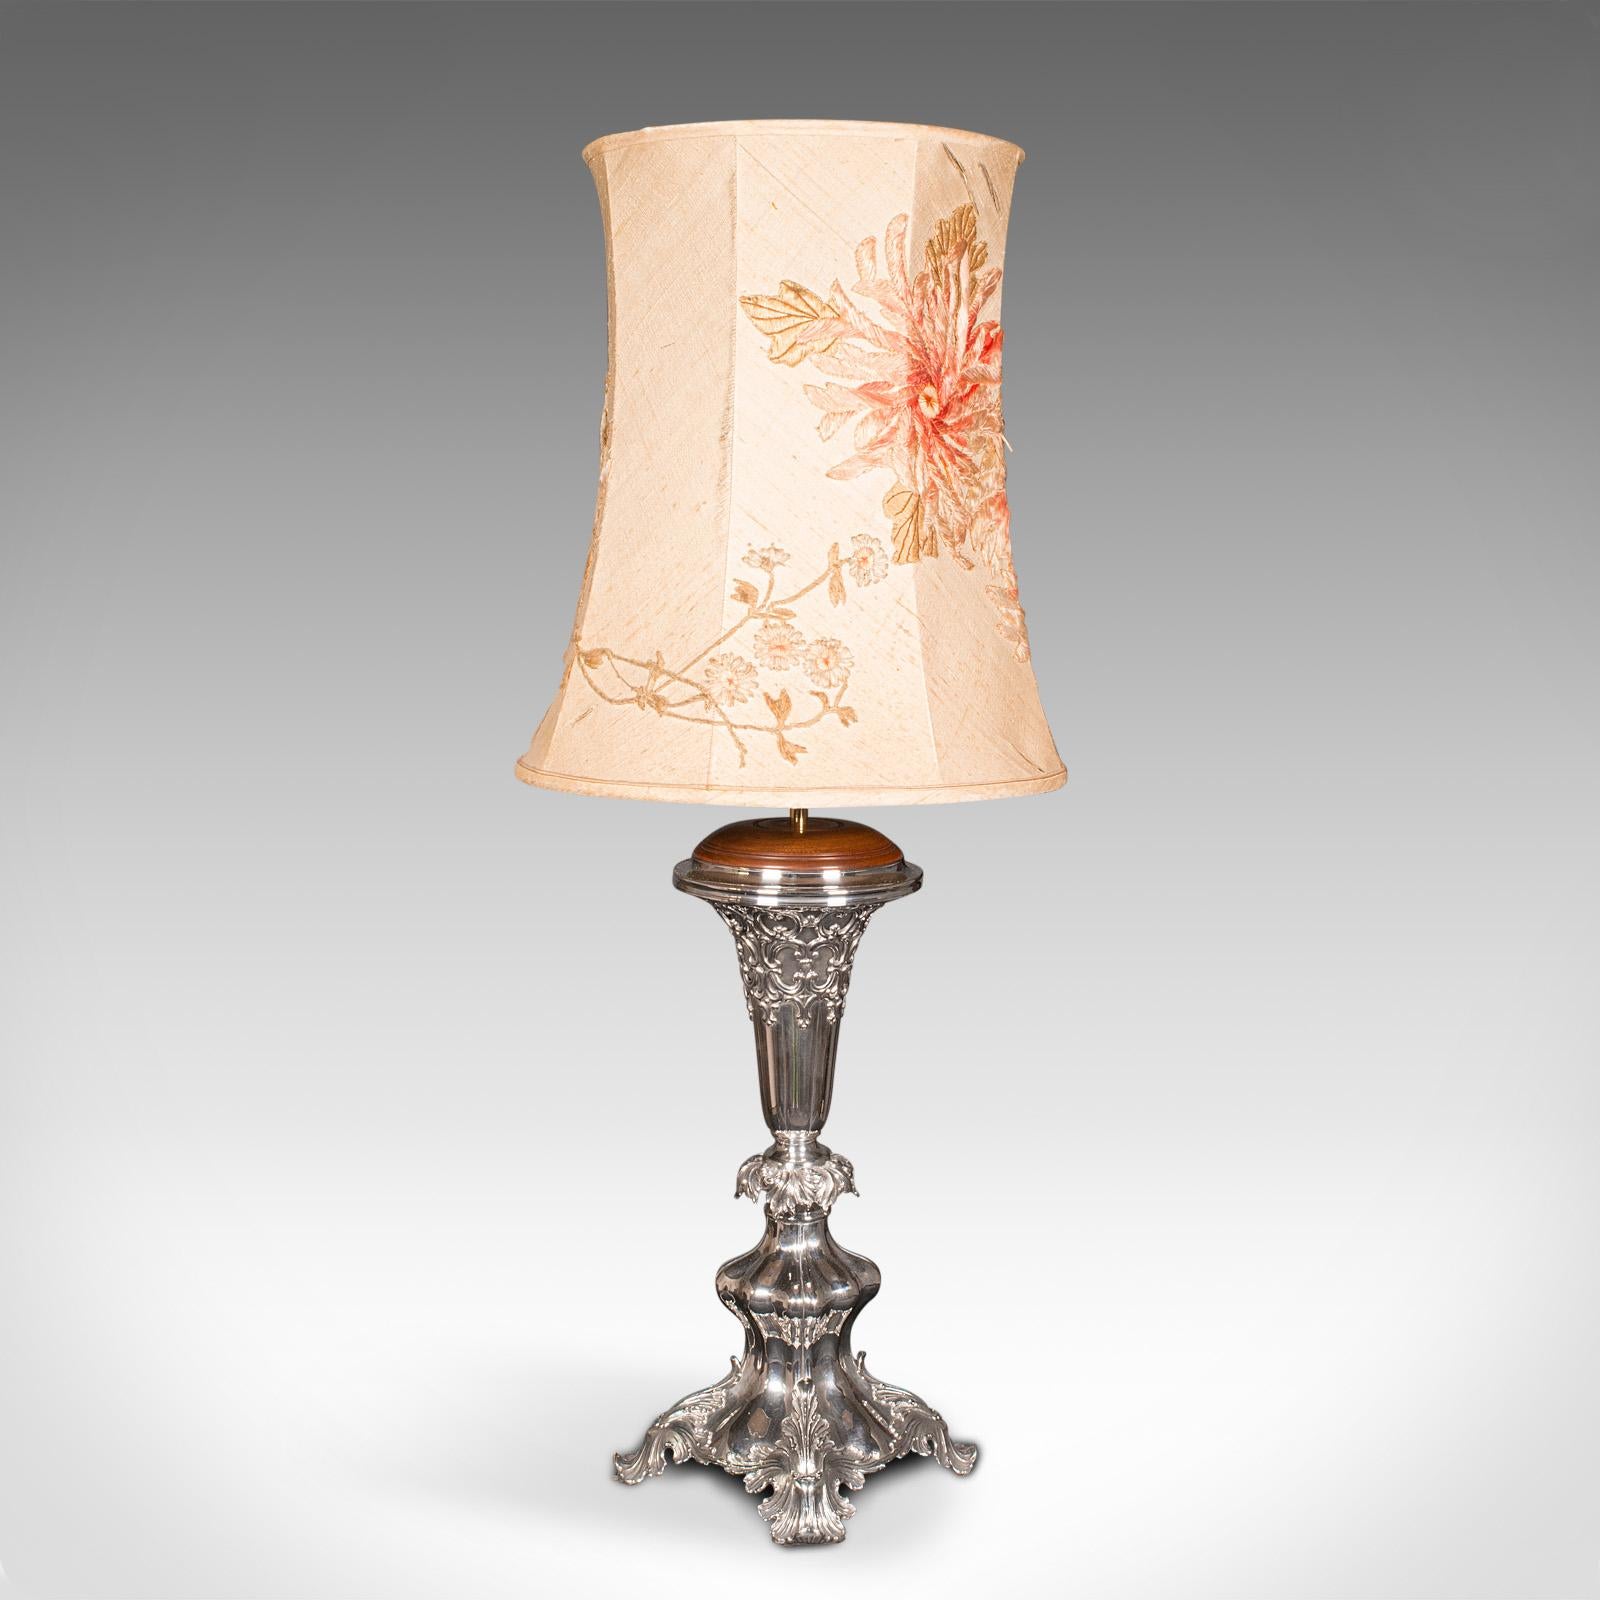 This is an antique decorative table lamp. An English, silver plate and walnut side light, dating to the late Victorian period, circa 1900.

Impressive statement lamp standing at over 3' tall with shade
Displays a desirable aged patina and in good